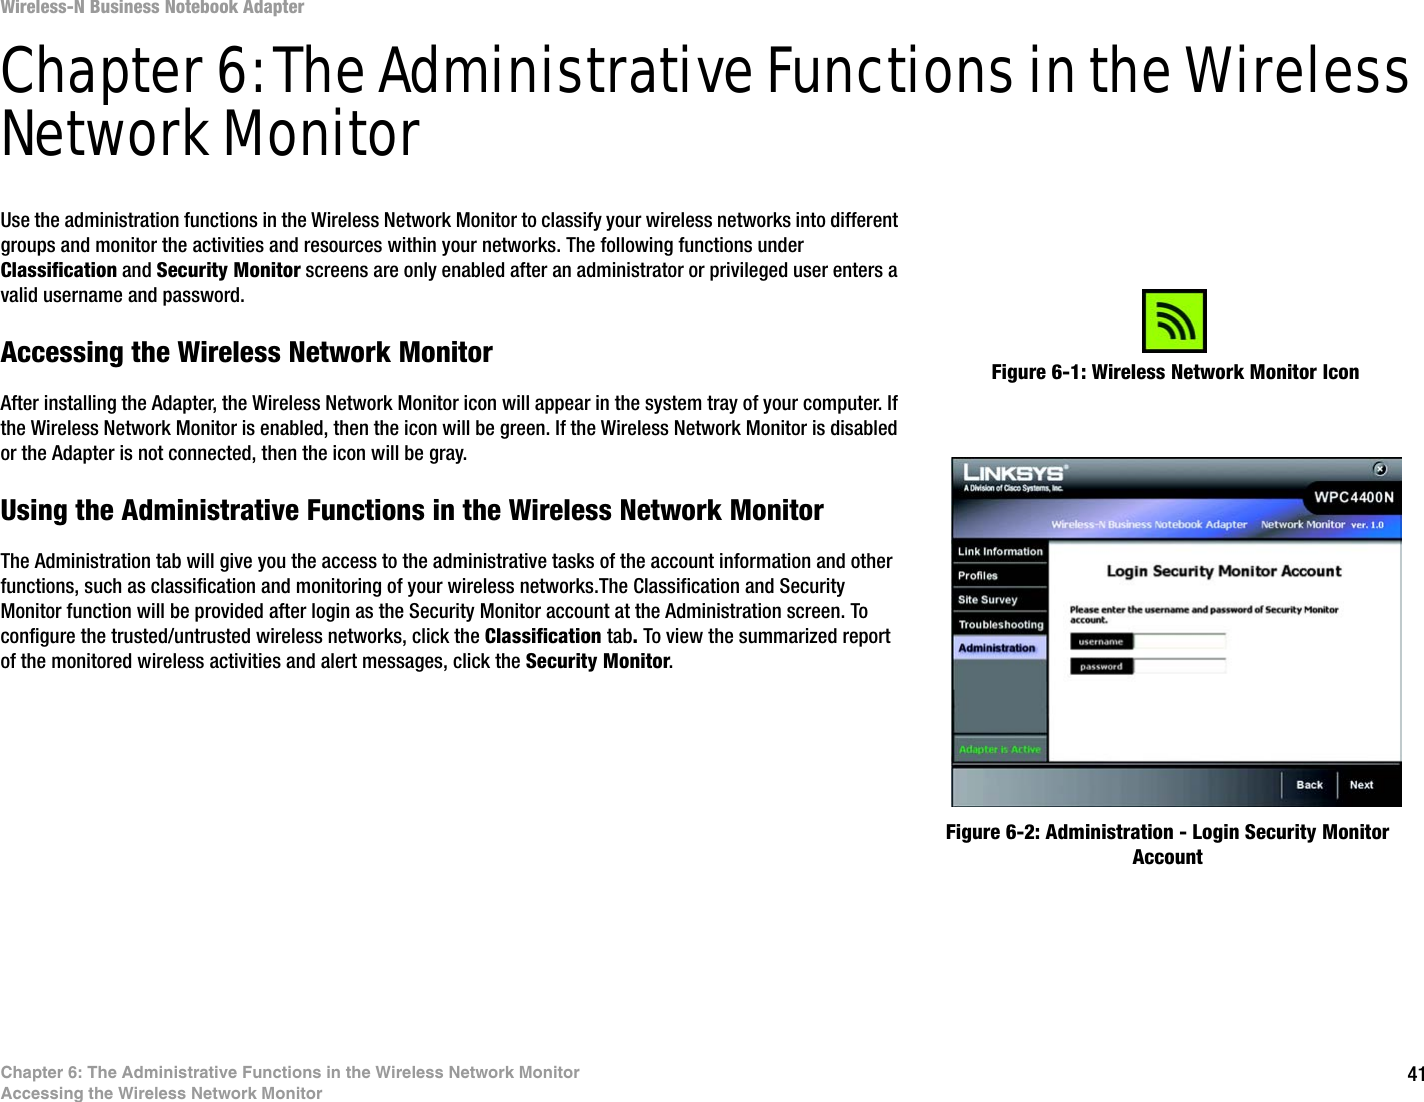 41Chapter 6: The Administrative Functions in the Wireless Network MonitorAccessing the Wireless Network MonitorWireless-N Business Notebook Adapter Chapter 6: The Administrative Functions in the Wireless Network MonitorUse the administration functions in the Wireless Network Monitor to classify your wireless networks into different groups and monitor the activities and resources within your networks. The following functions under Classification and Security Monitor screens are only enabled after an administrator or privileged user enters a valid username and password.Accessing the Wireless Network MonitorAfter installing the Adapter, the Wireless Network Monitor icon will appear in the system tray of your computer. If the Wireless Network Monitor is enabled, then the icon will be green. If the Wireless Network Monitor is disabled or the Adapter is not connected, then the icon will be gray.Using the Administrative Functions in the Wireless Network MonitorThe Administration tab will give you the access to the administrative tasks of the account information and other functions, such as classification and monitoring of your wireless networks.The Classification and Security Monitor function will be provided after login as the Security Monitor account at the Administration screen. To configure the trusted/untrusted wireless networks, click the Classification tab. To view the summarized report of the monitored wireless activities and alert messages, click the Security Monitor. Figure 6-1: Wireless Network Monitor IconFigure 6-2: Administration - Login Security Monitor Account